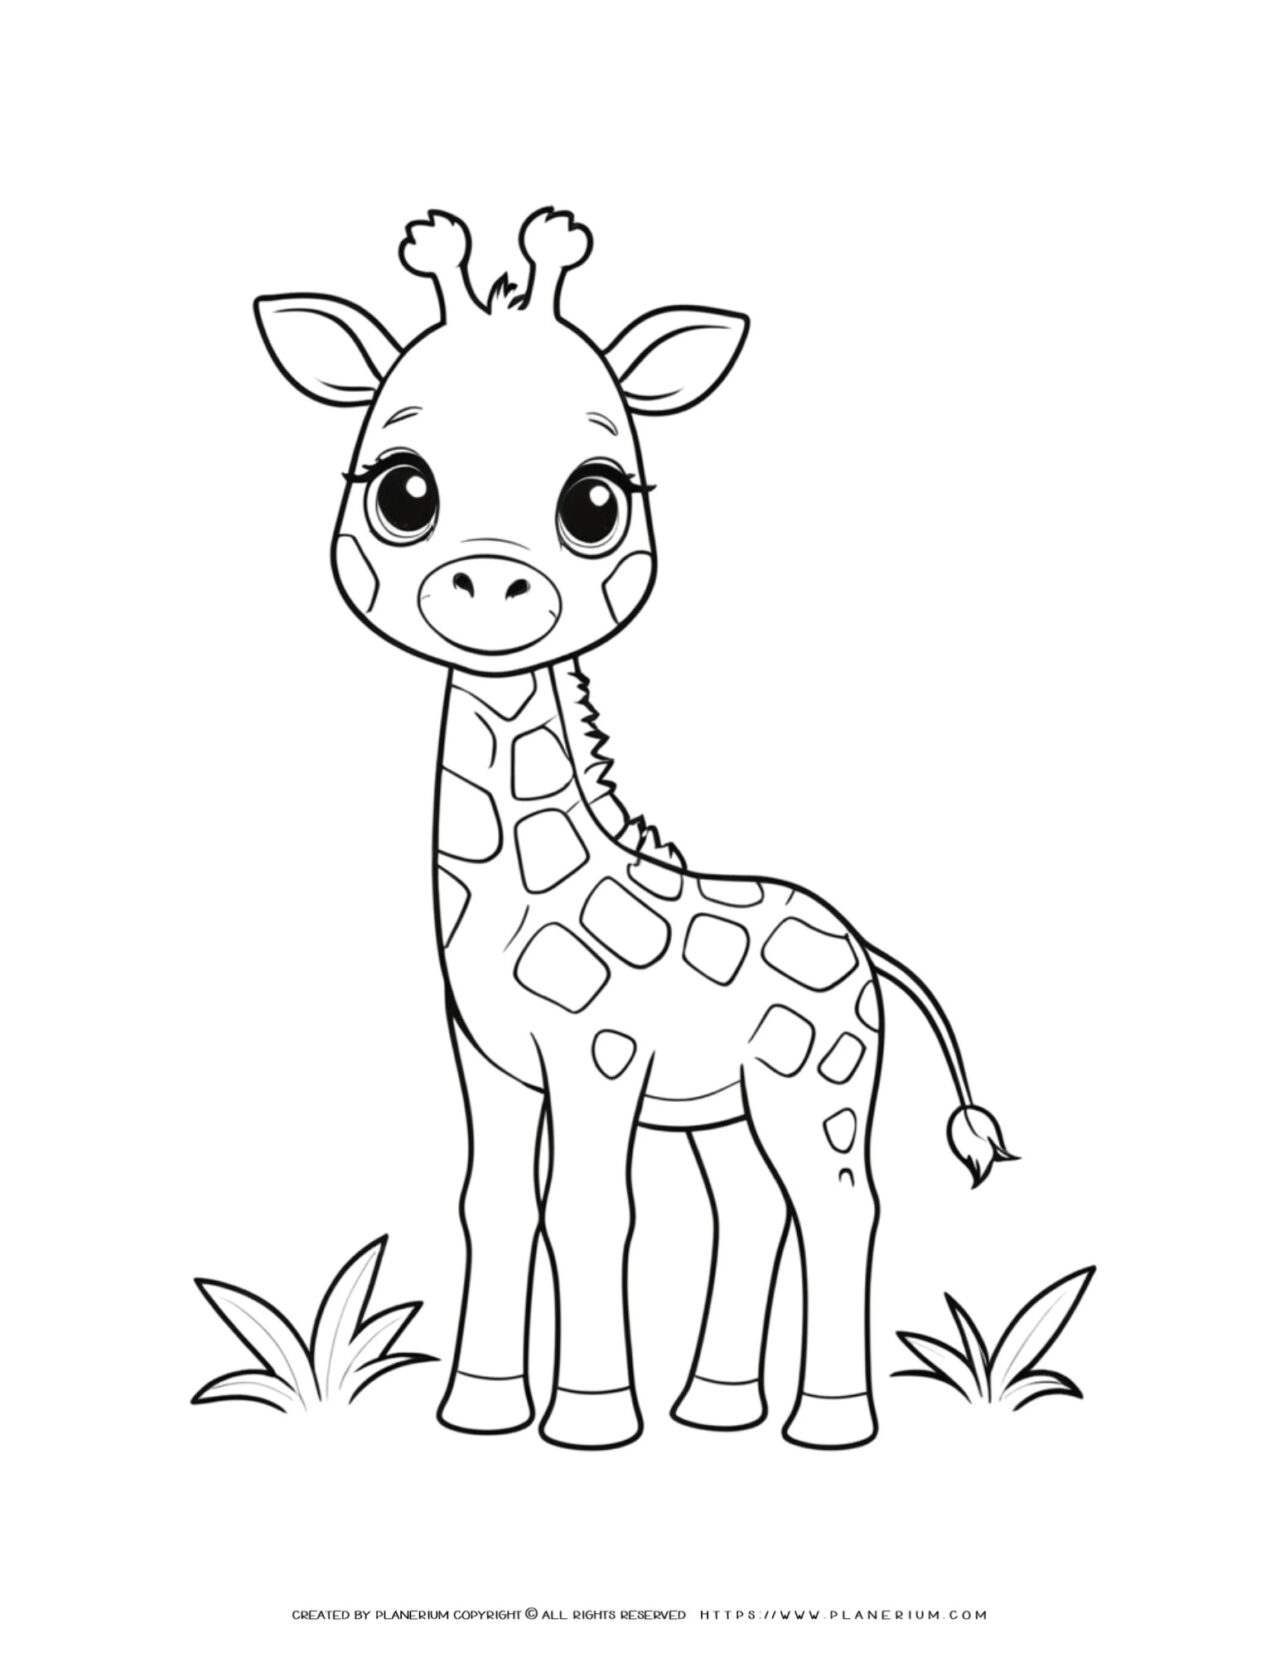 cute-giraffe-and-grass-coloring-page-for-kids